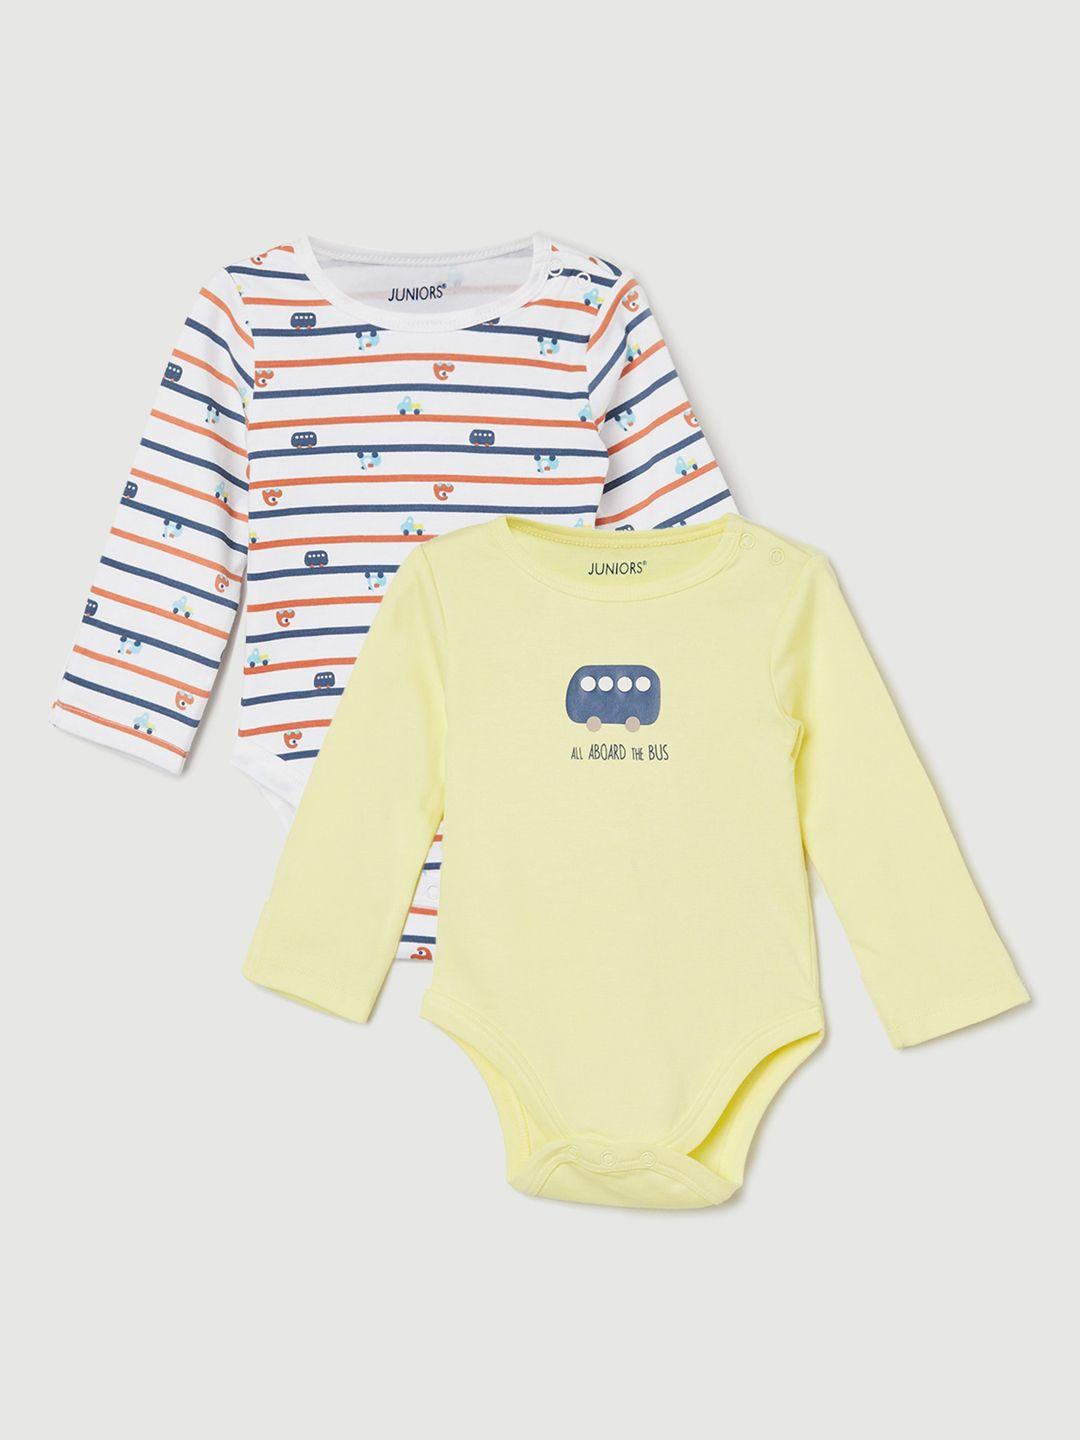 juniors-by-lifestyle-infant-yellow,-white-pack-of-2-striped-printed-pure-cotton-rompers